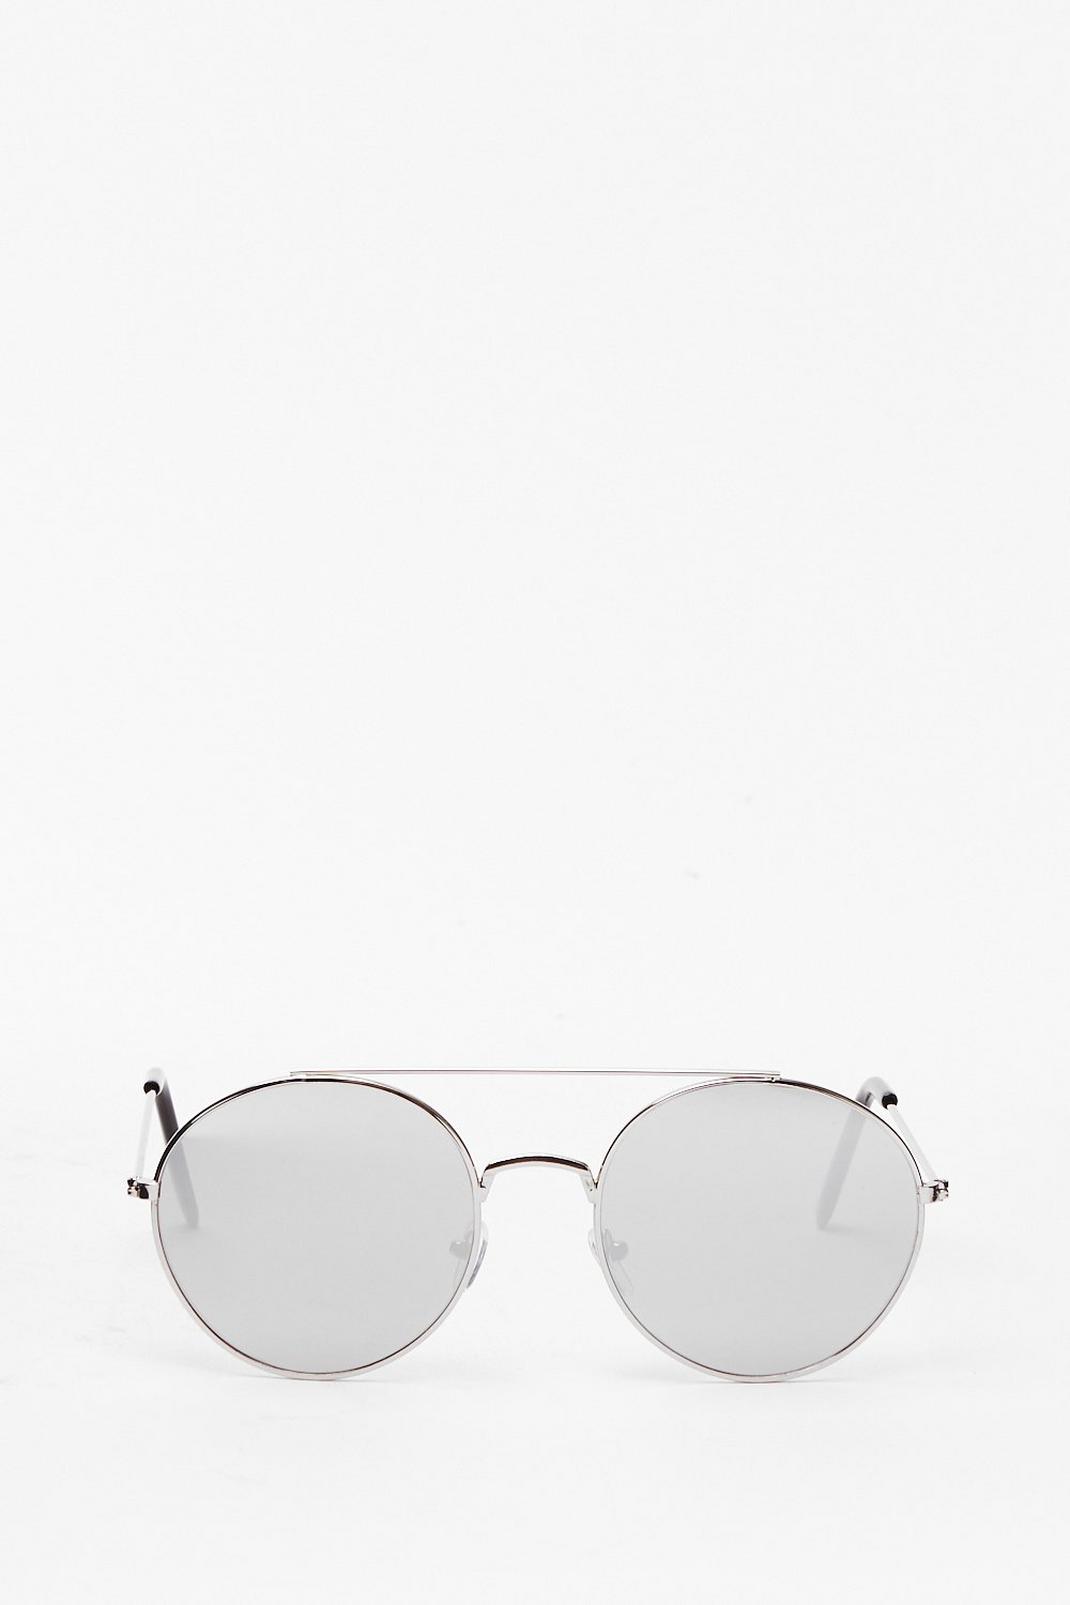 Silver 'Round About Now Aviator Sunglasses image number 1